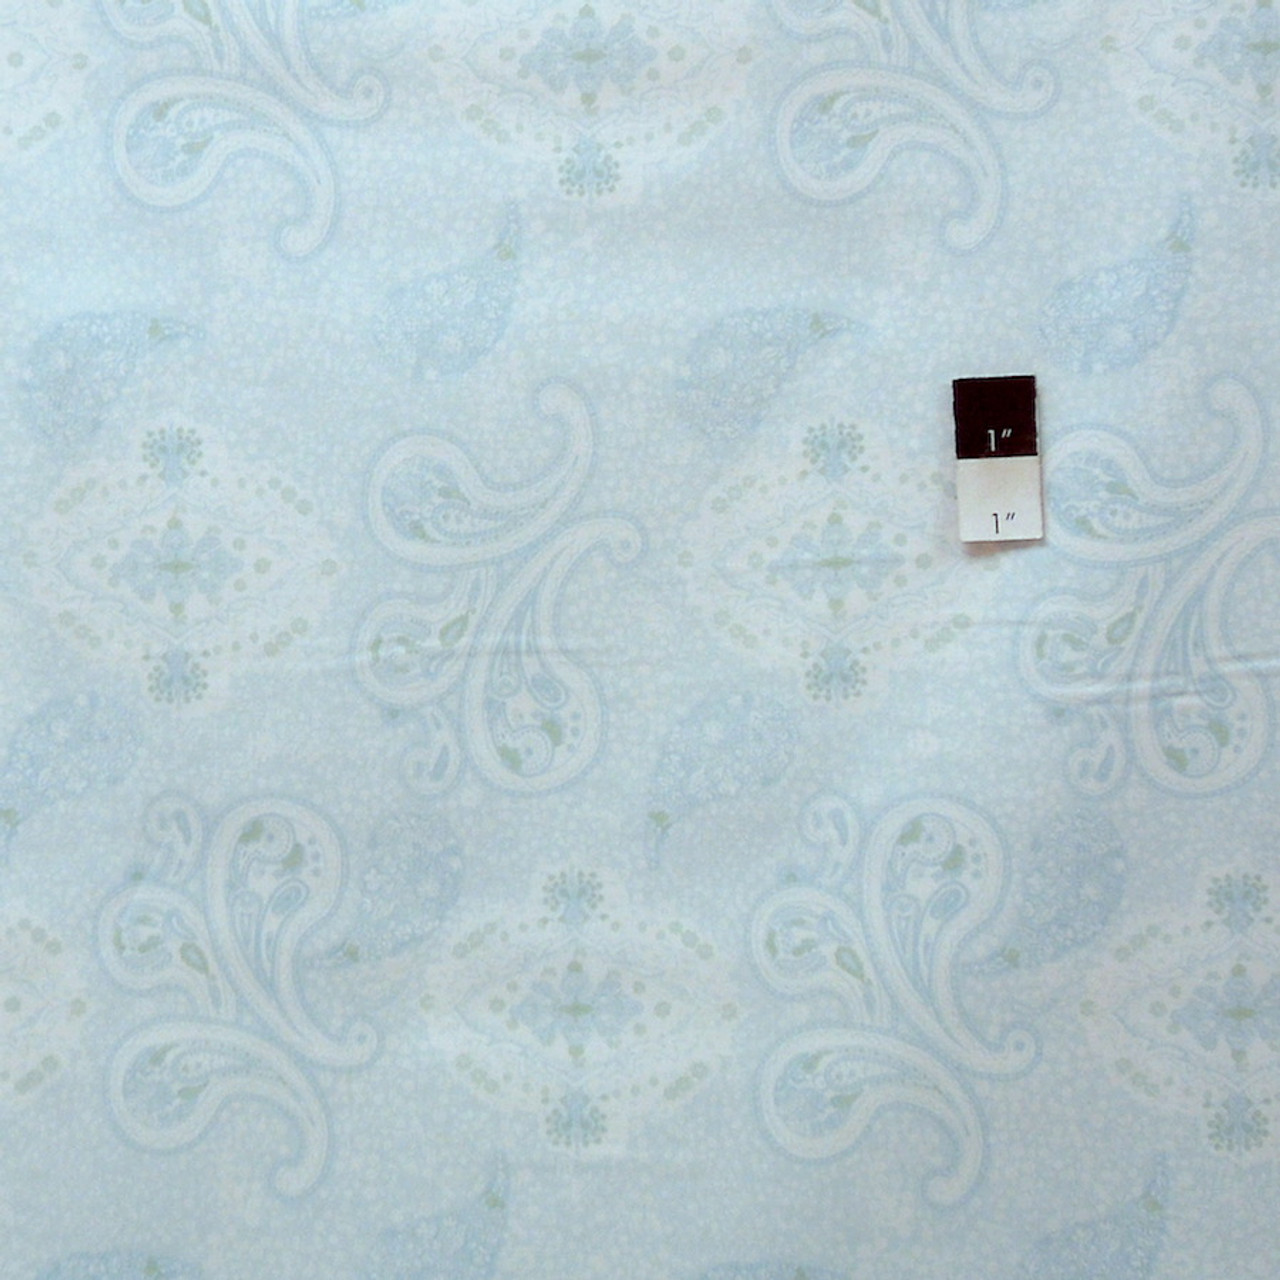 Annette Tatum PWAT091 Vintage Sweet Confection Teal Cotton Fabric By The Yard